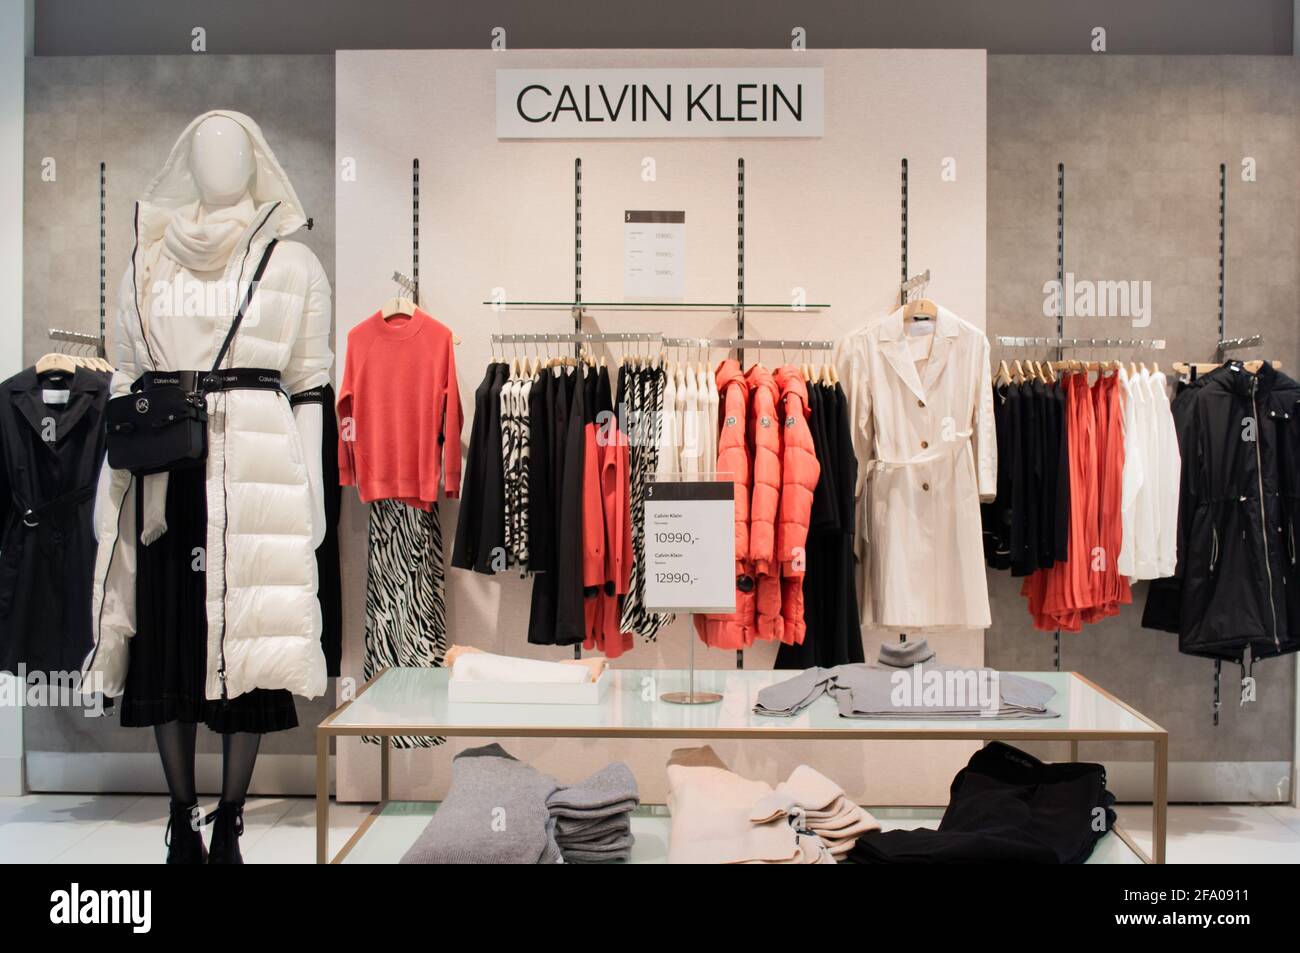 Moscow, Russia, November 2020: Corner of the Calvin Klein brand